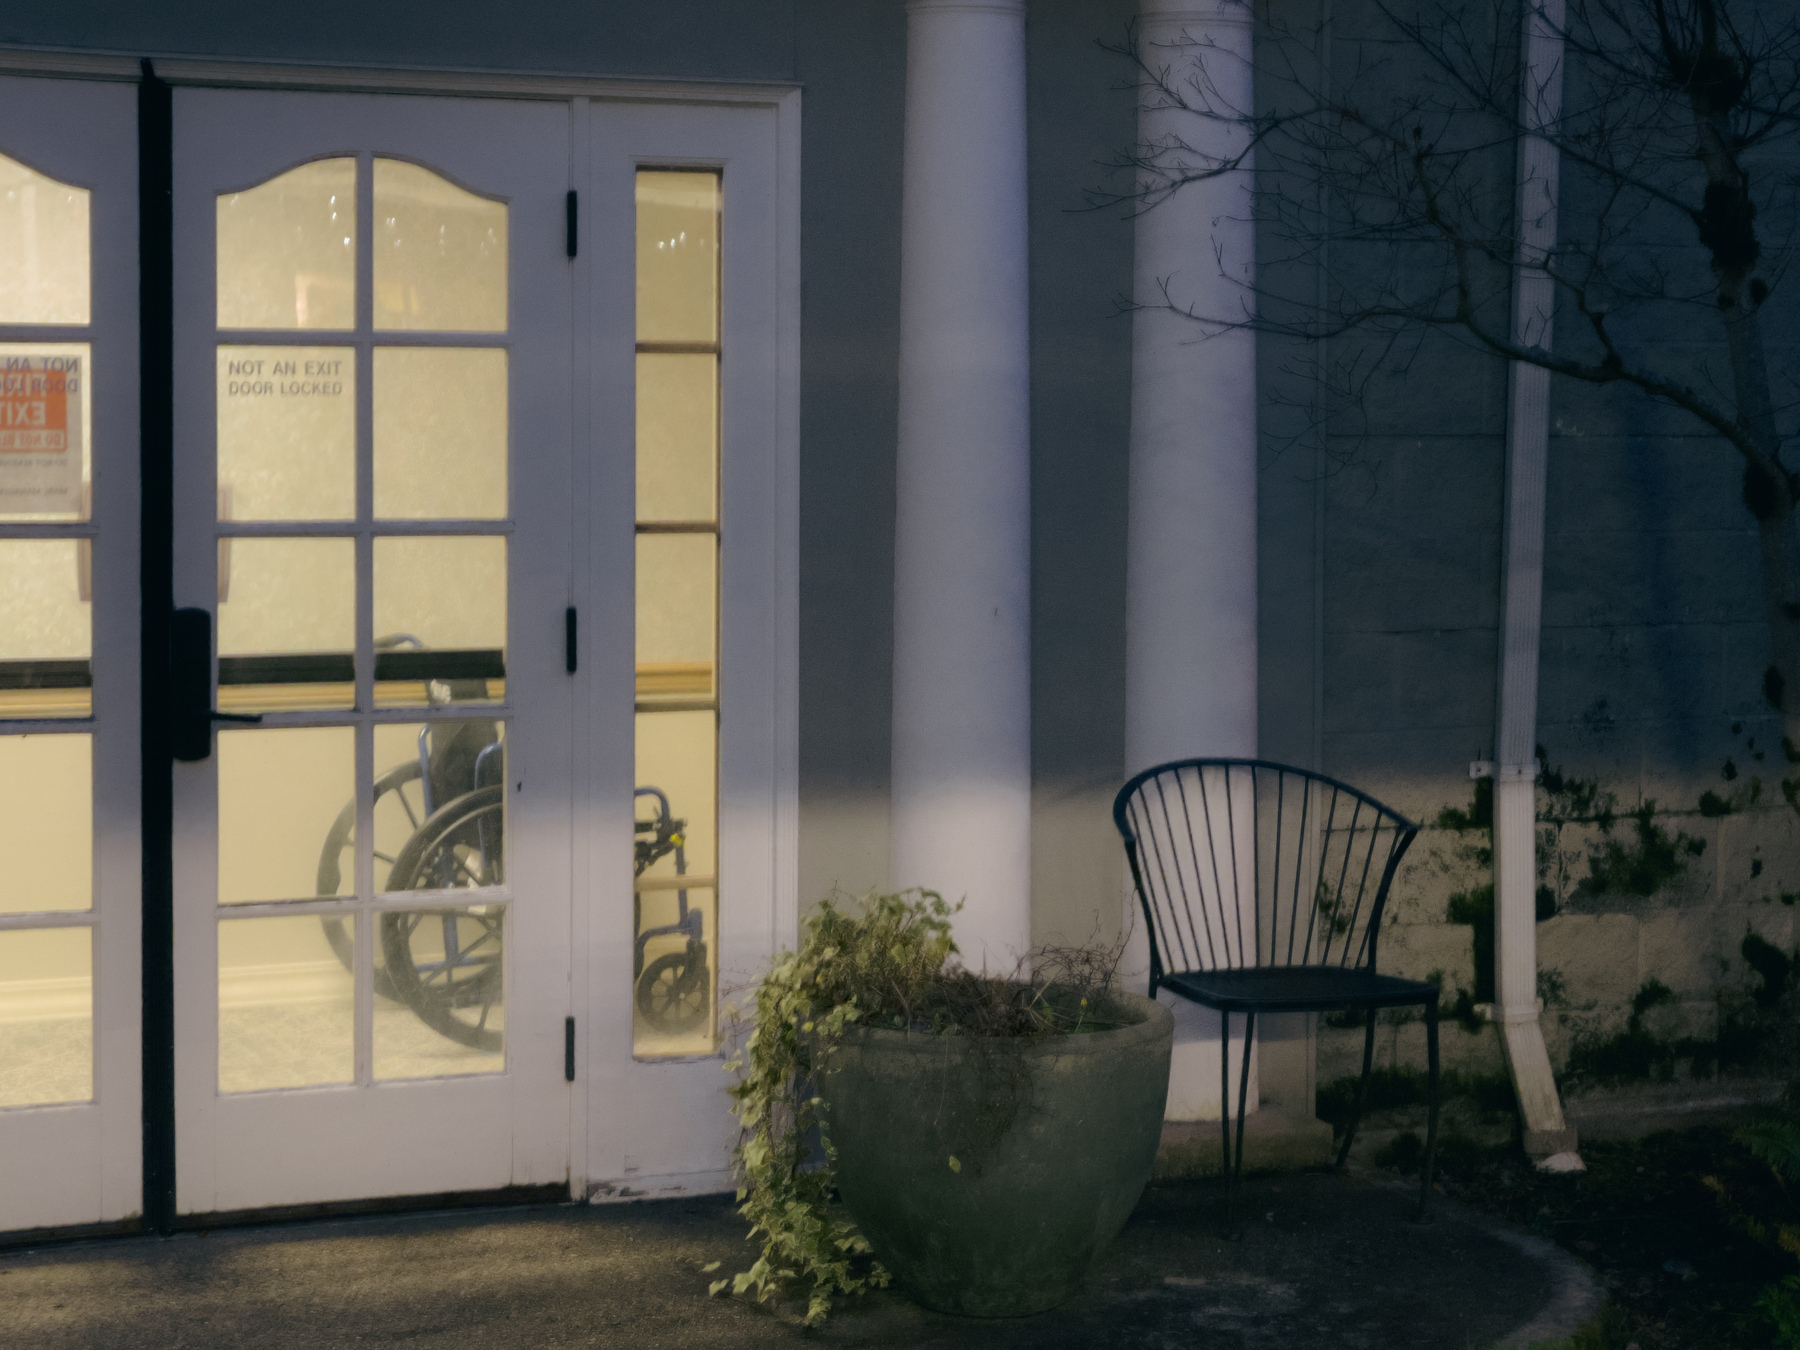 Picture of outside of building. French doors to left. Wheel chair visible through the doors. A garden chair on the outside to the right. A shadow line cutting across scene from left to right.